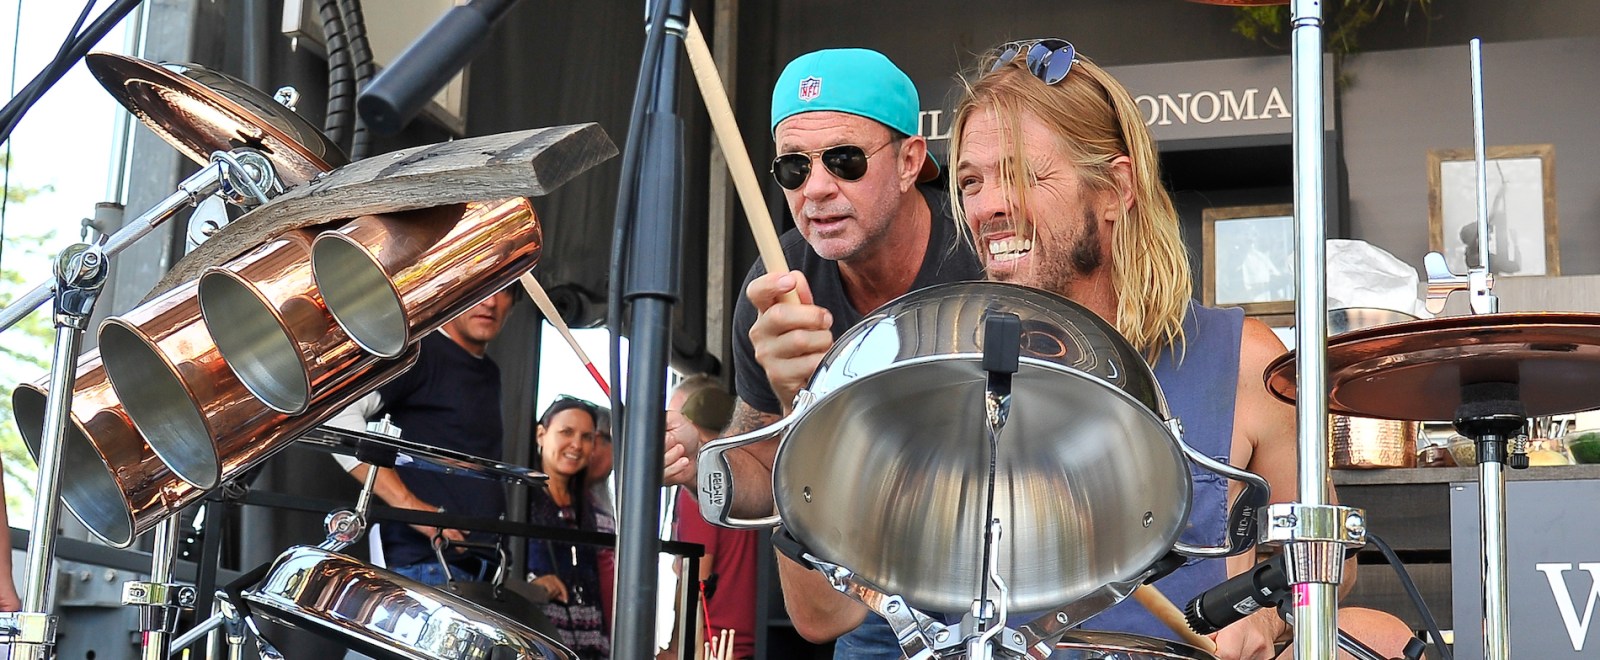 Chad Smith Red Hot Chili Peppers Taylor Hawkins Foo Fighters 4th Annual BottleRock Napa Music Festival 2016